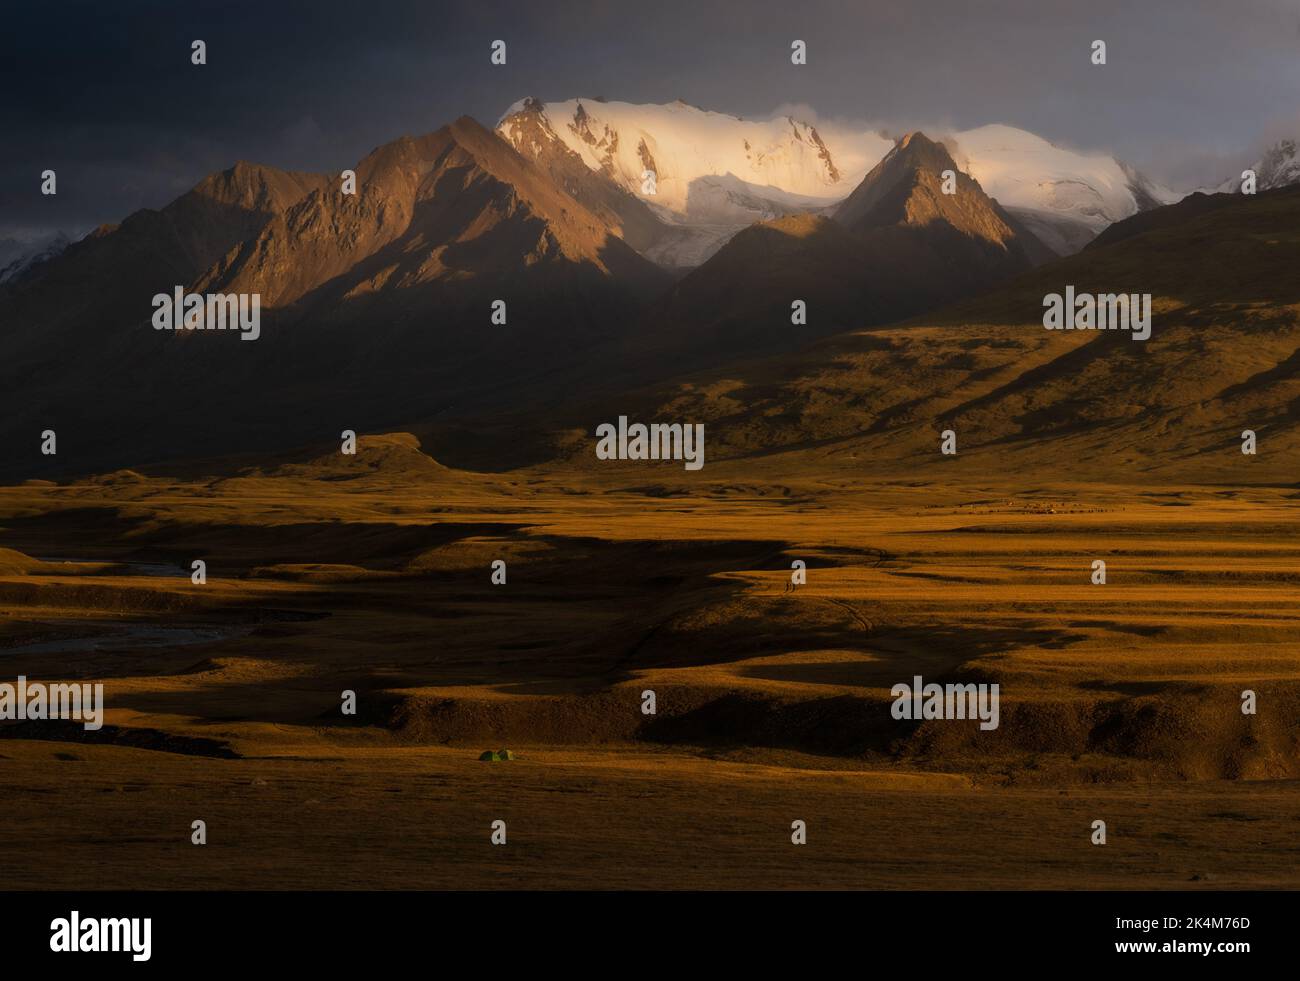 Dramatic peaks of Tien Shan mountains in remote Sary Jaz valley during a spectacular sunset, Kyrgyzstan Stock Photo